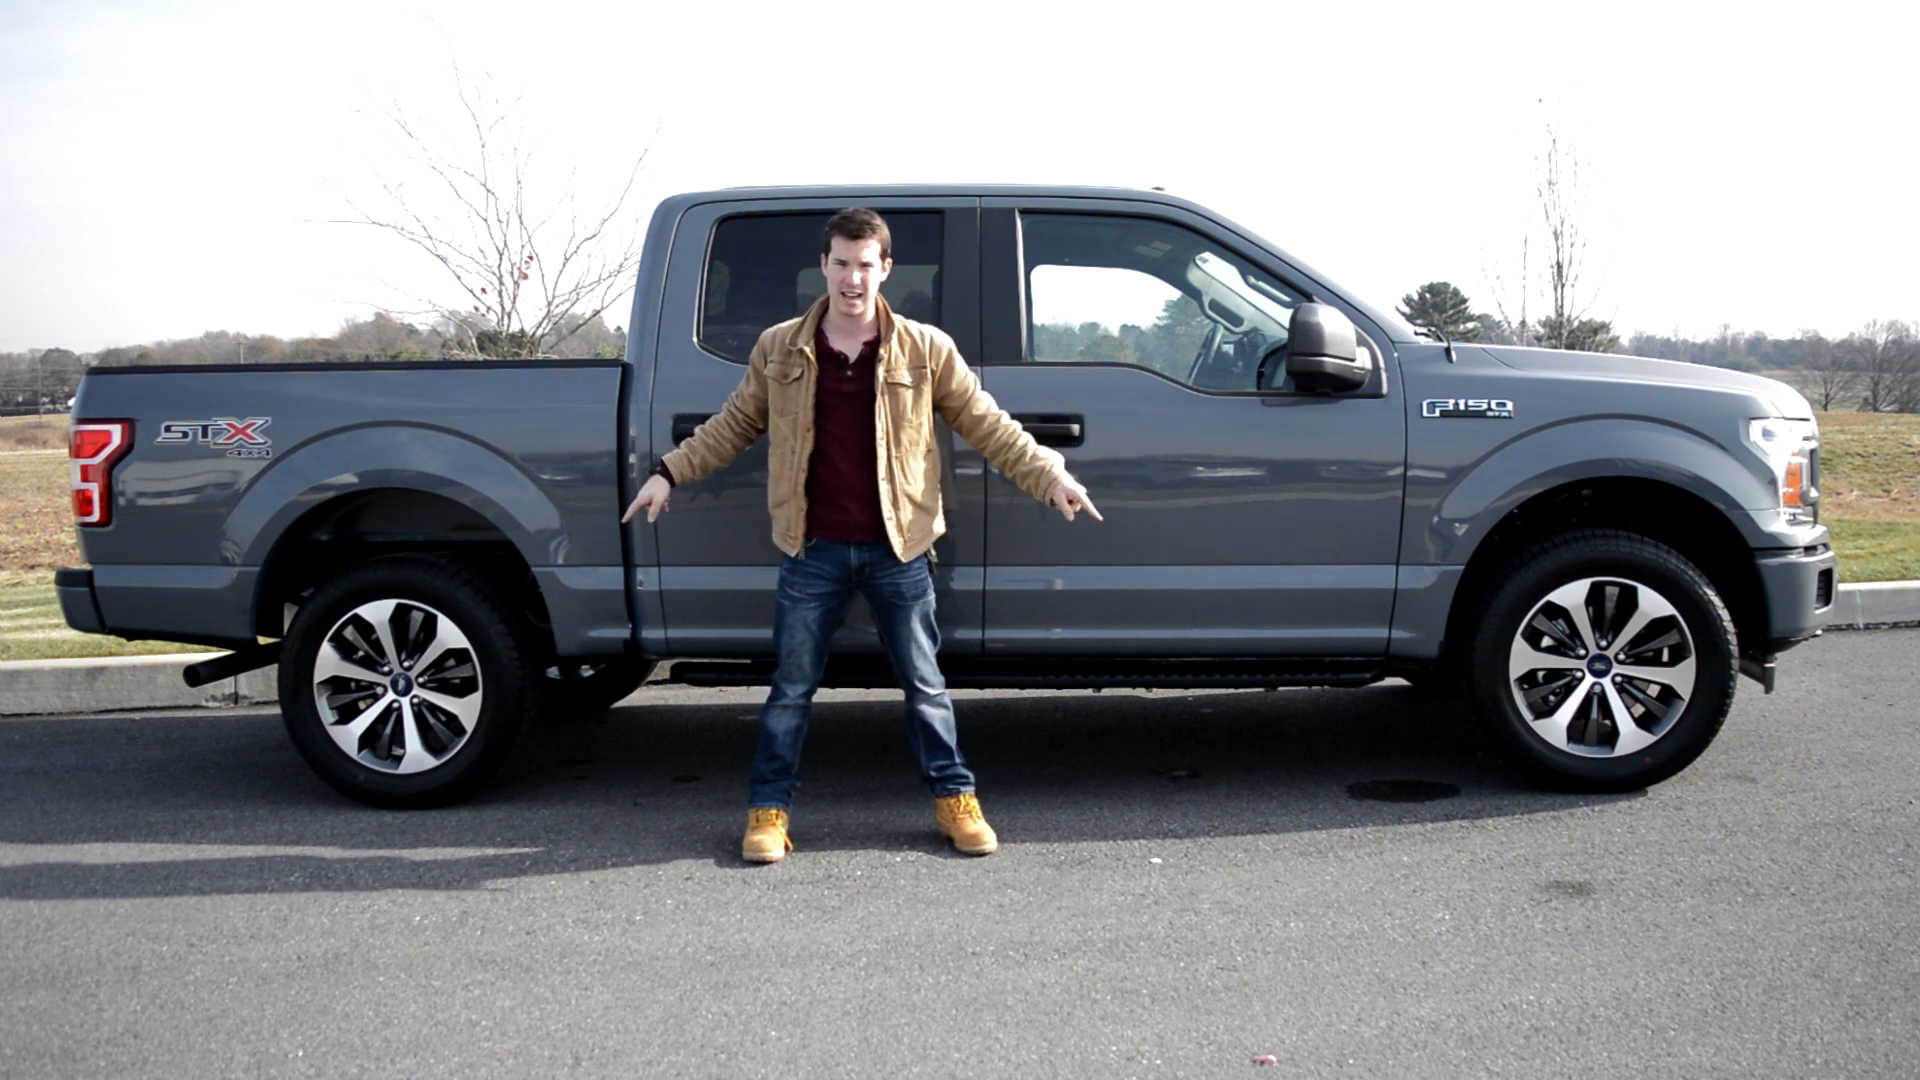 alpha shark pictures f-150 stx review